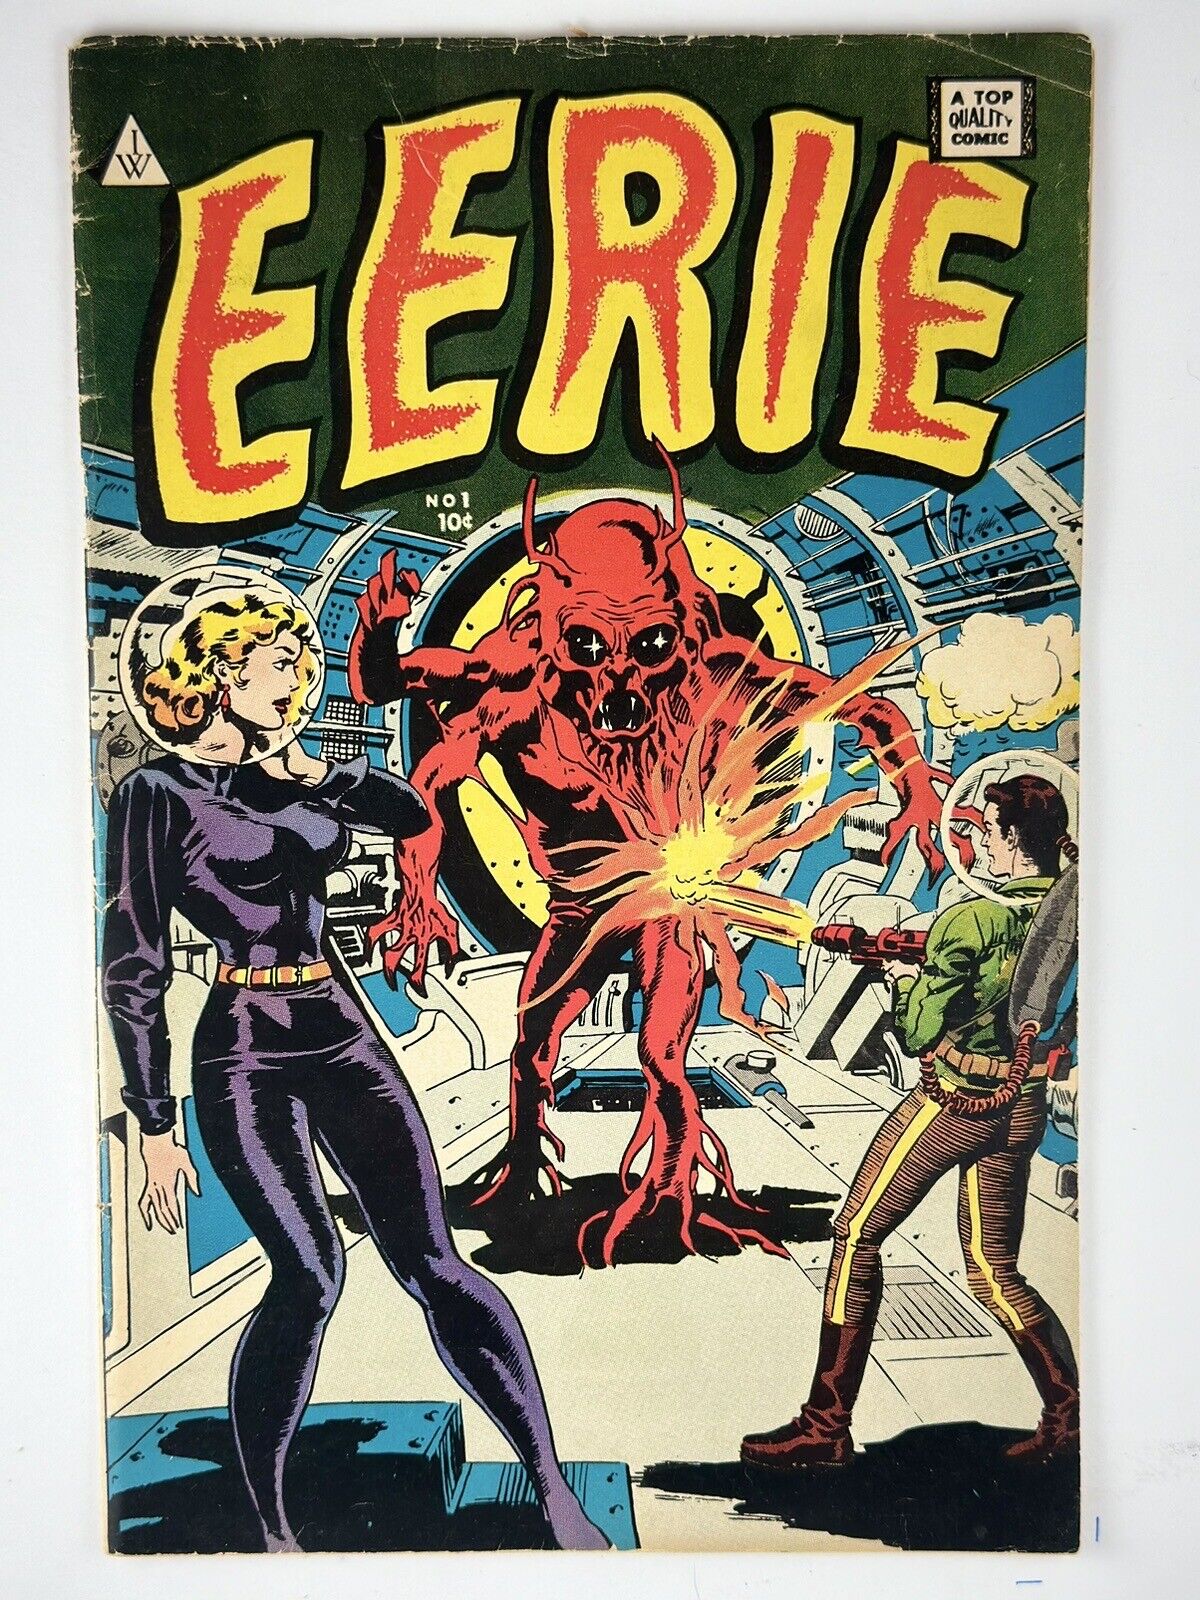 Eerie #1 Wally Wood Art First Issue Sci-Fi Horror  IW Comic 1964 - Mid Grade